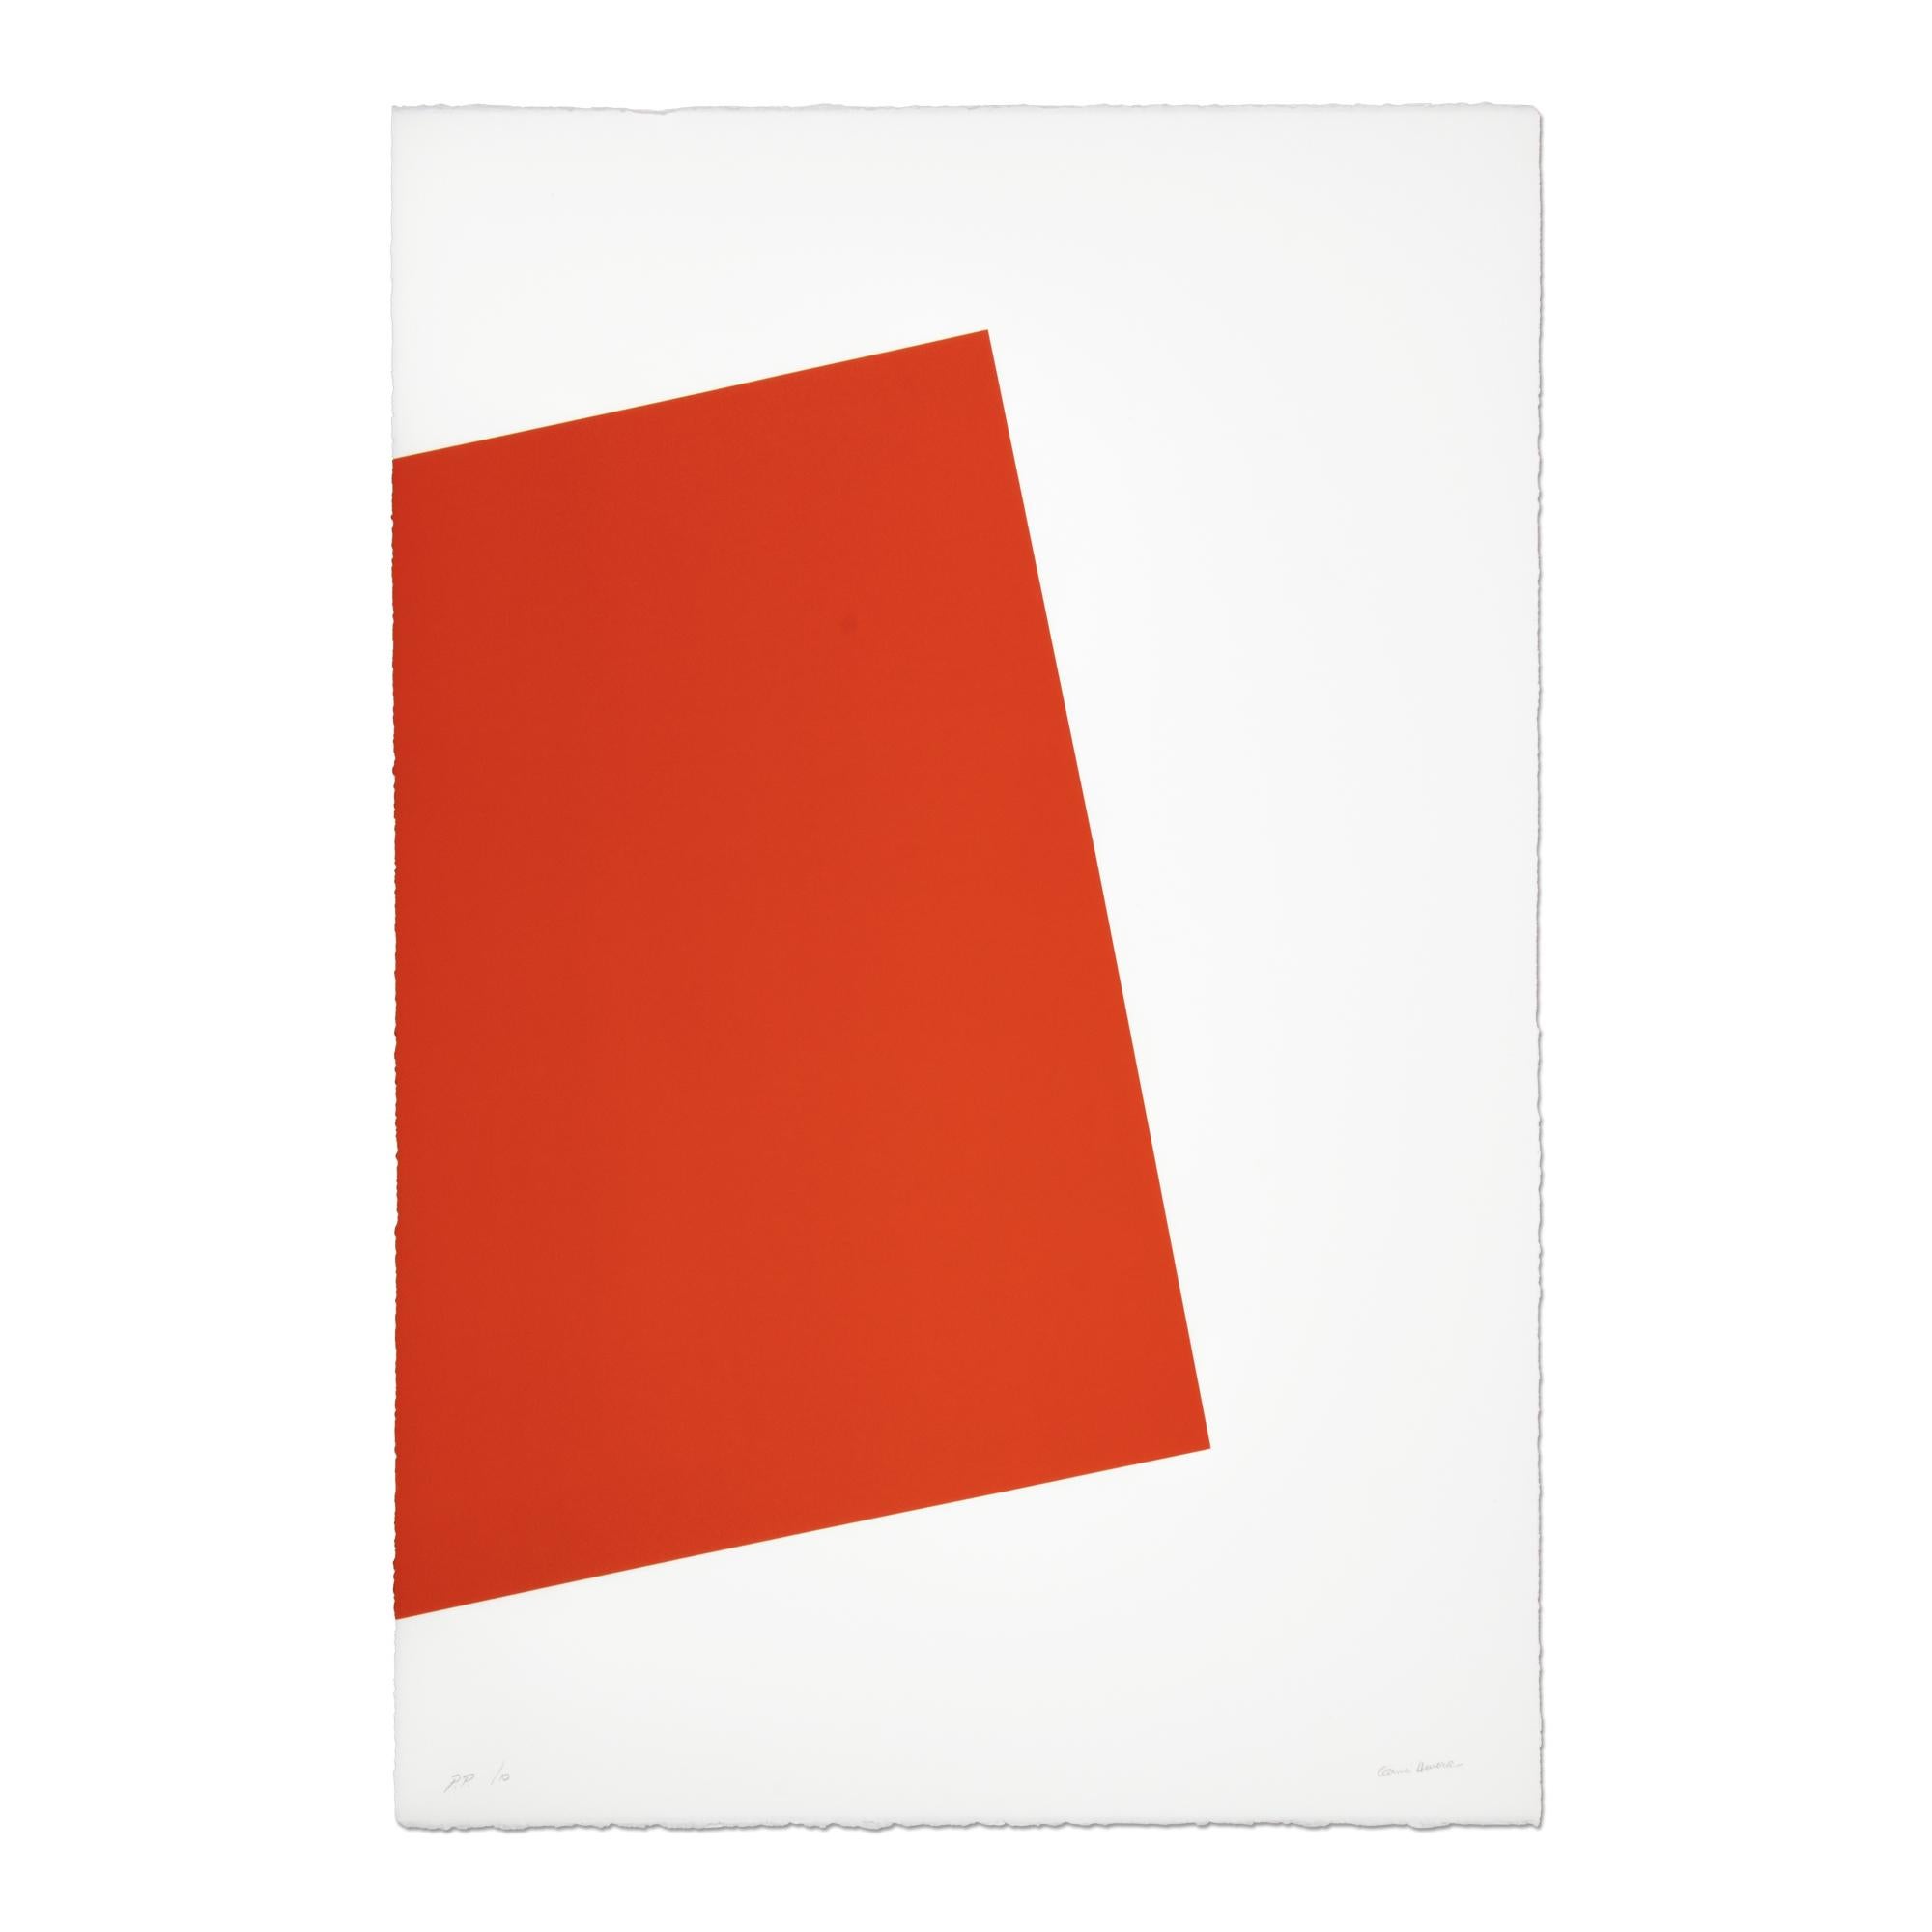 Carmen Herrera, Untitled (NRW) - Lithograph in Color, Minimalism, Signed Print